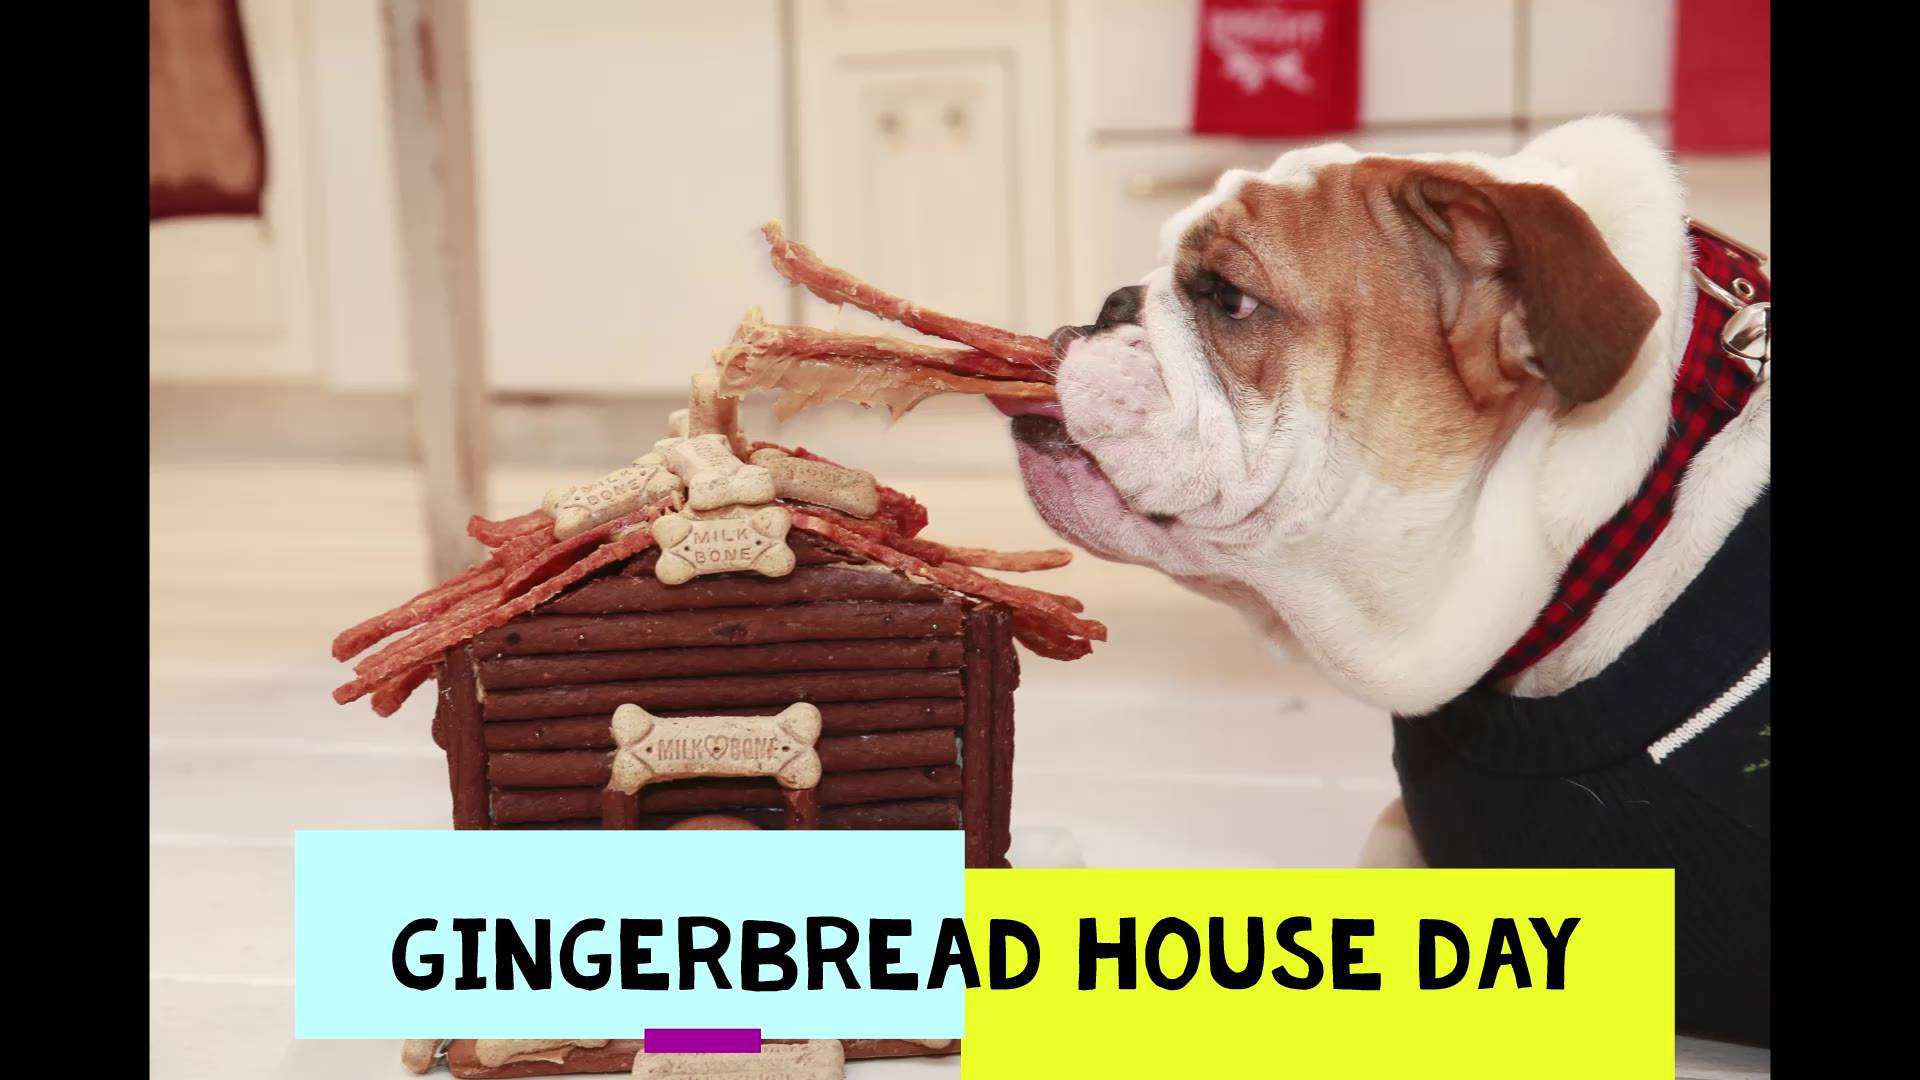 Gingerbread House Day Wishes Awesome Picture